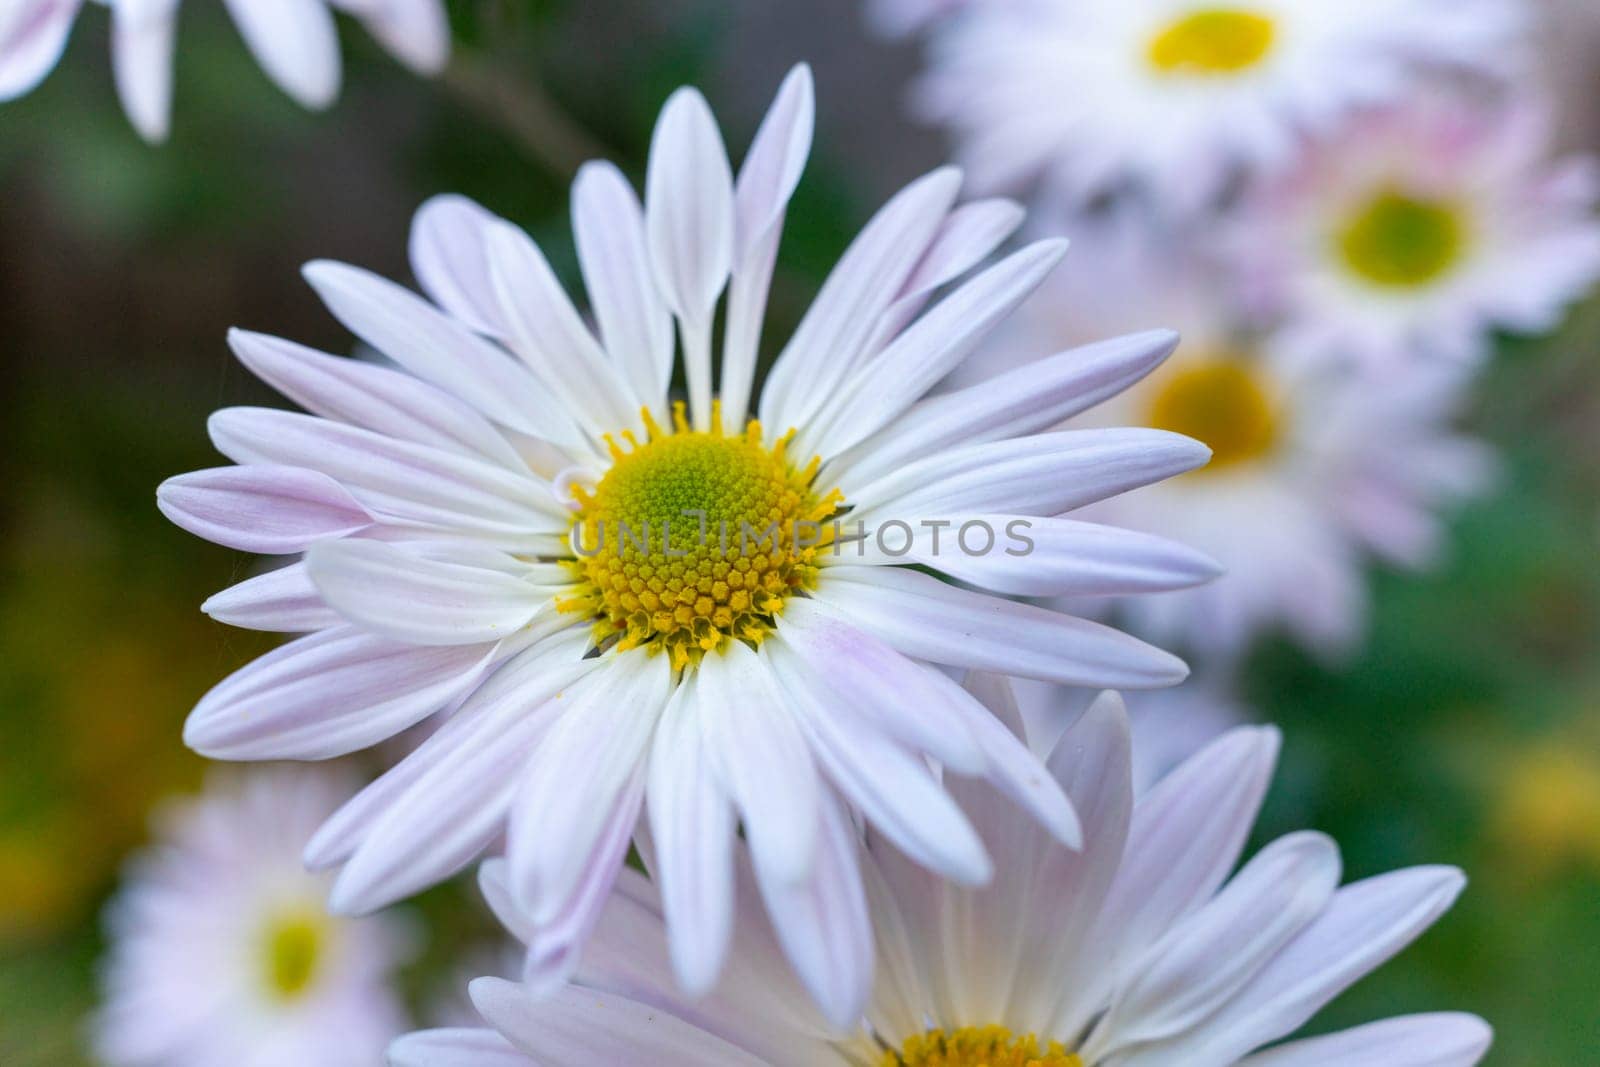 A large white daisy close-up on a blurred background of other flowers by Serhii_Voroshchuk